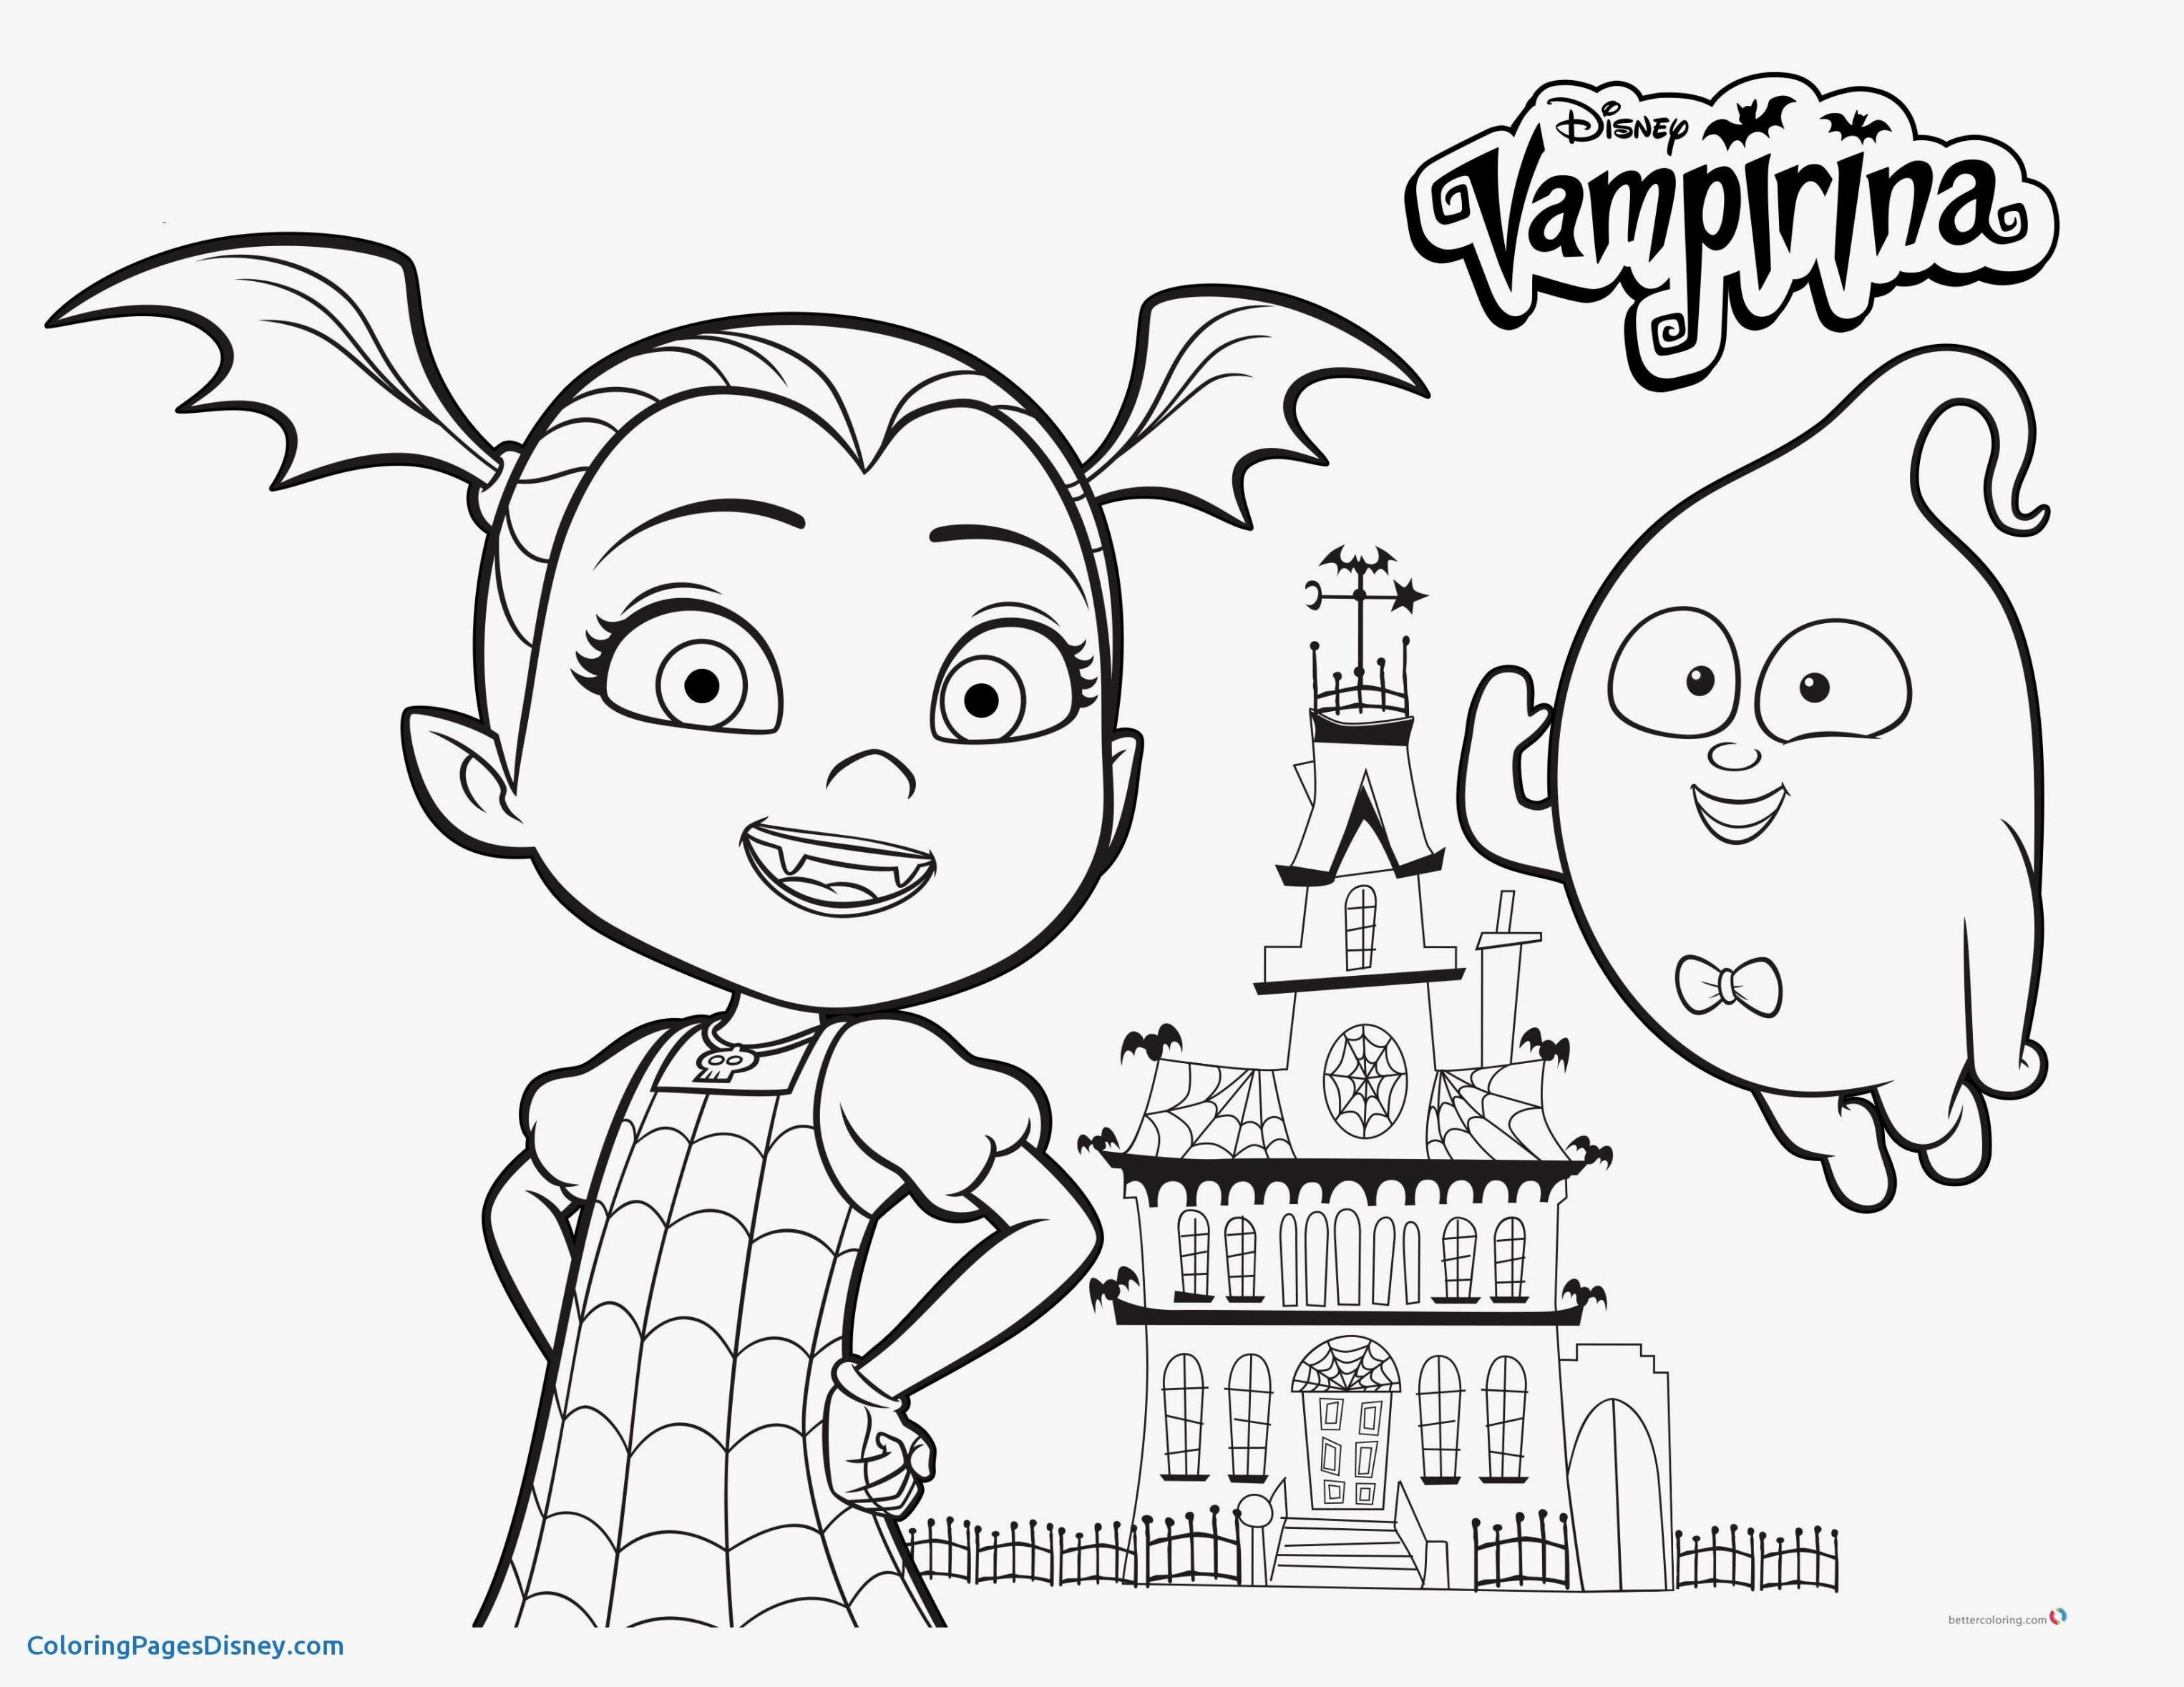 Disney.com Coloring Pages Luxury Disney Vampirina Coloring Pages Jvzooreview